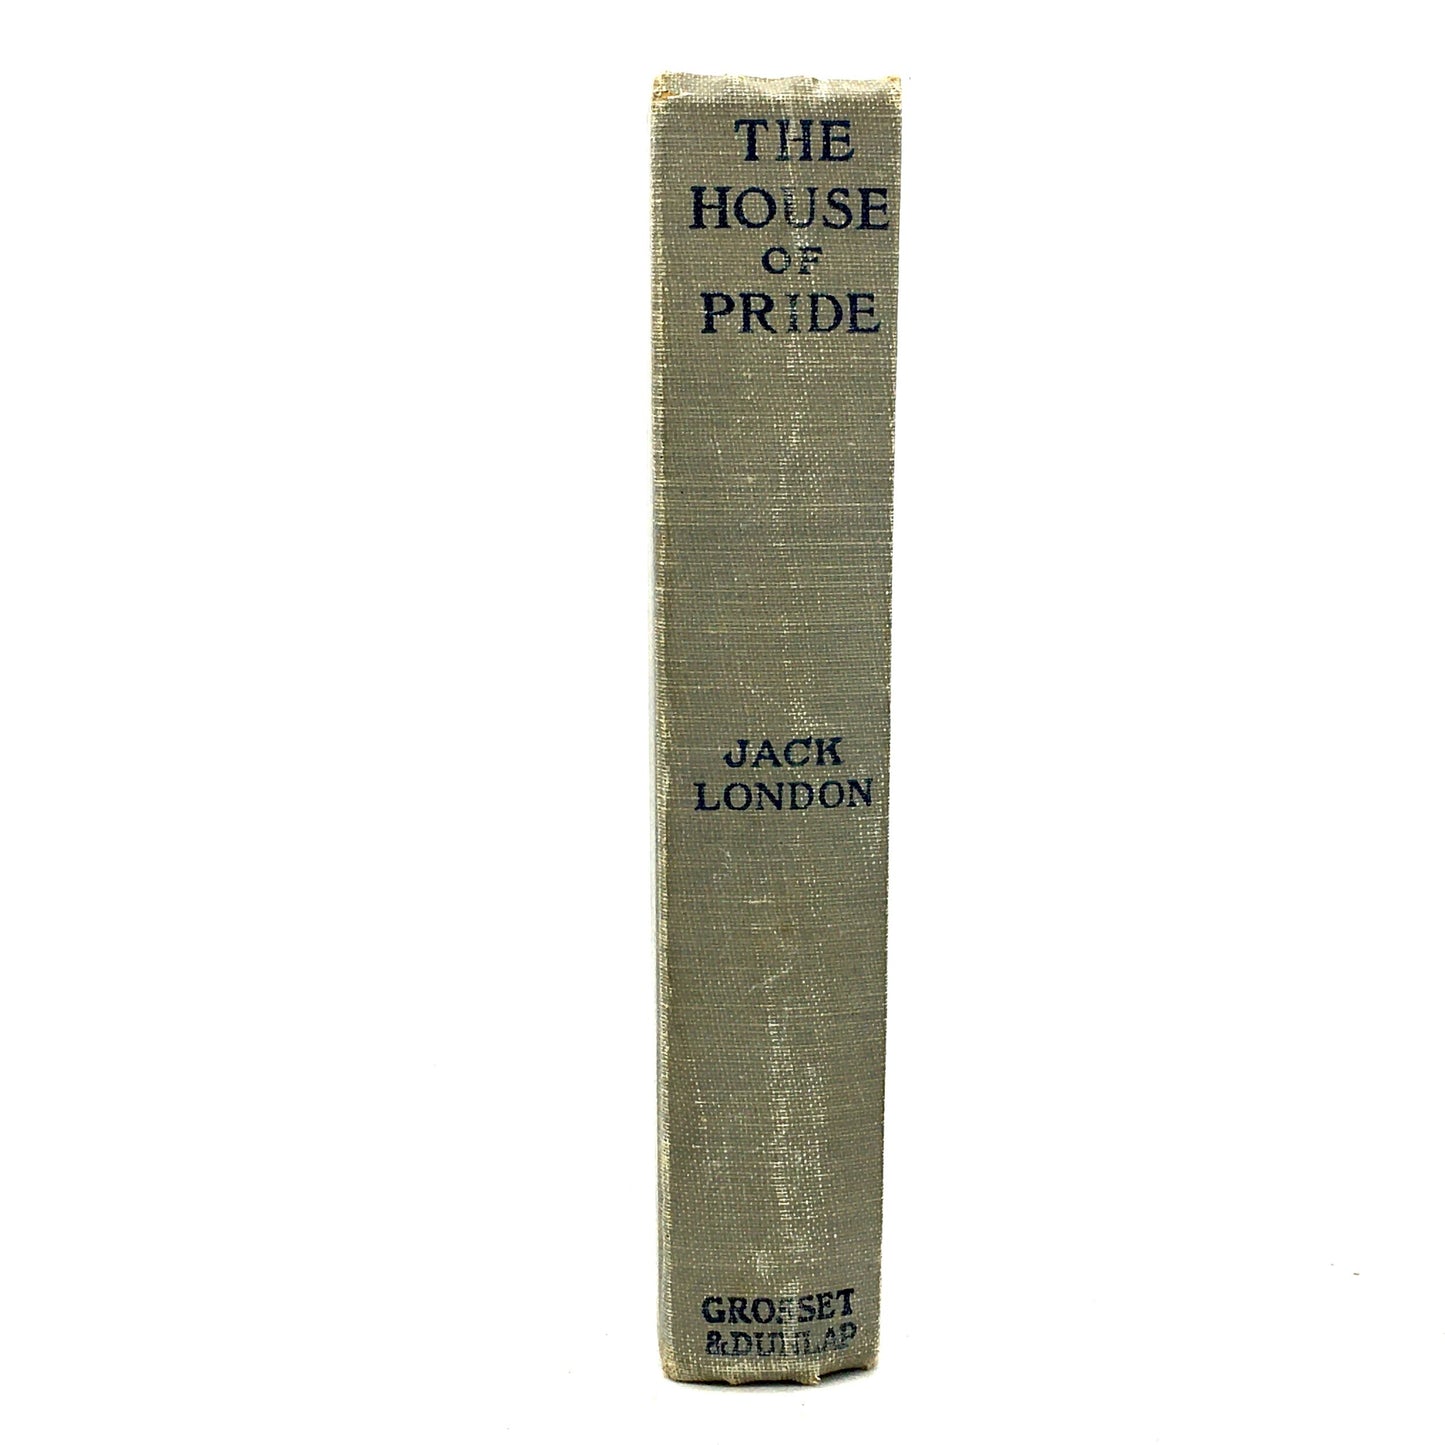 LONDON, Jack "The House of Pride" [Grosset & Dunlap, 1914] Grey - Buzz Bookstore